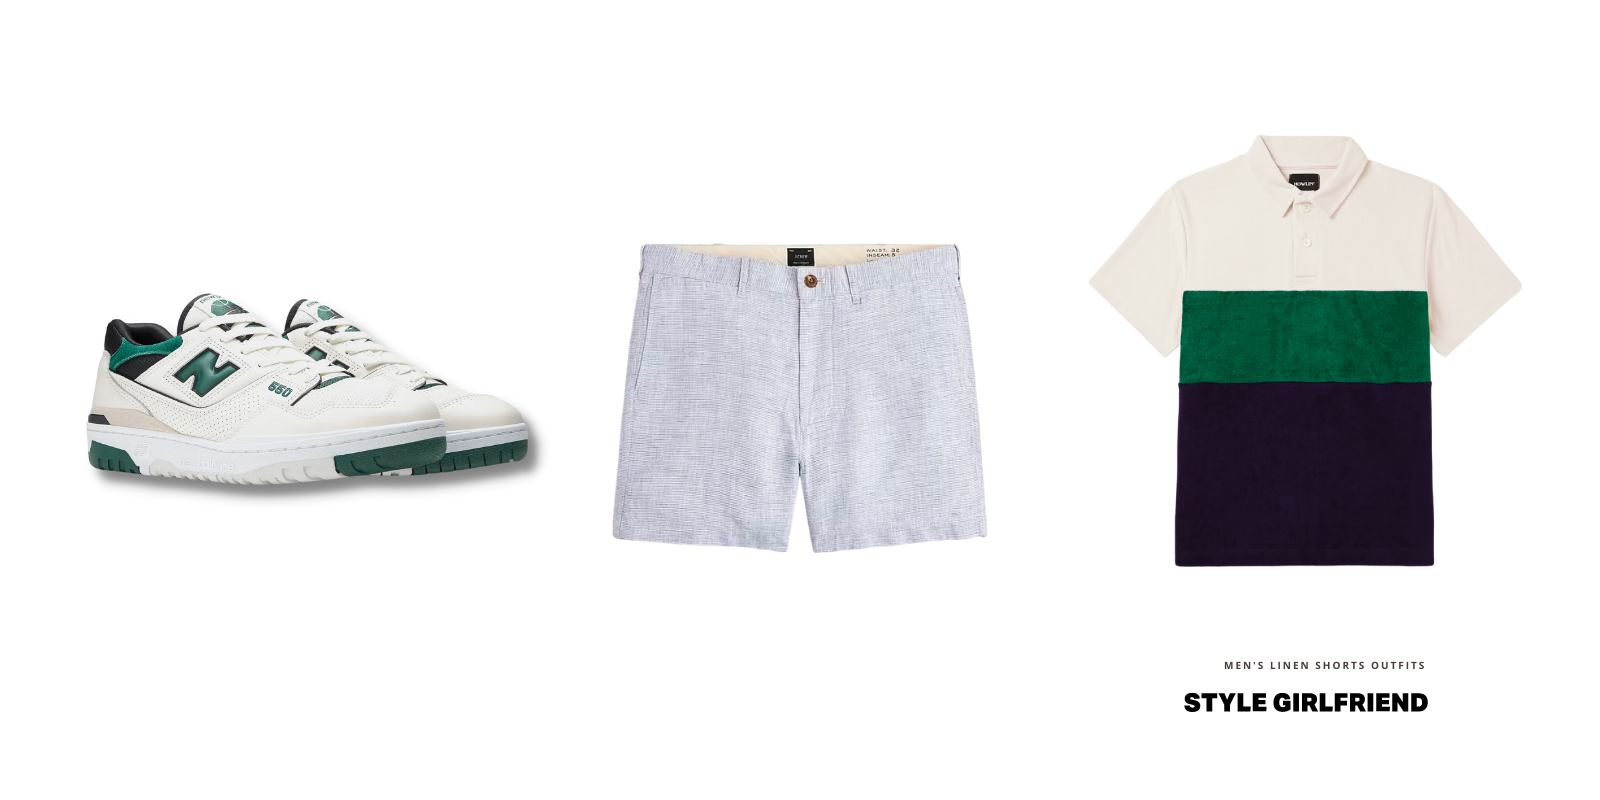 linen shorts with tennis shoes outfit